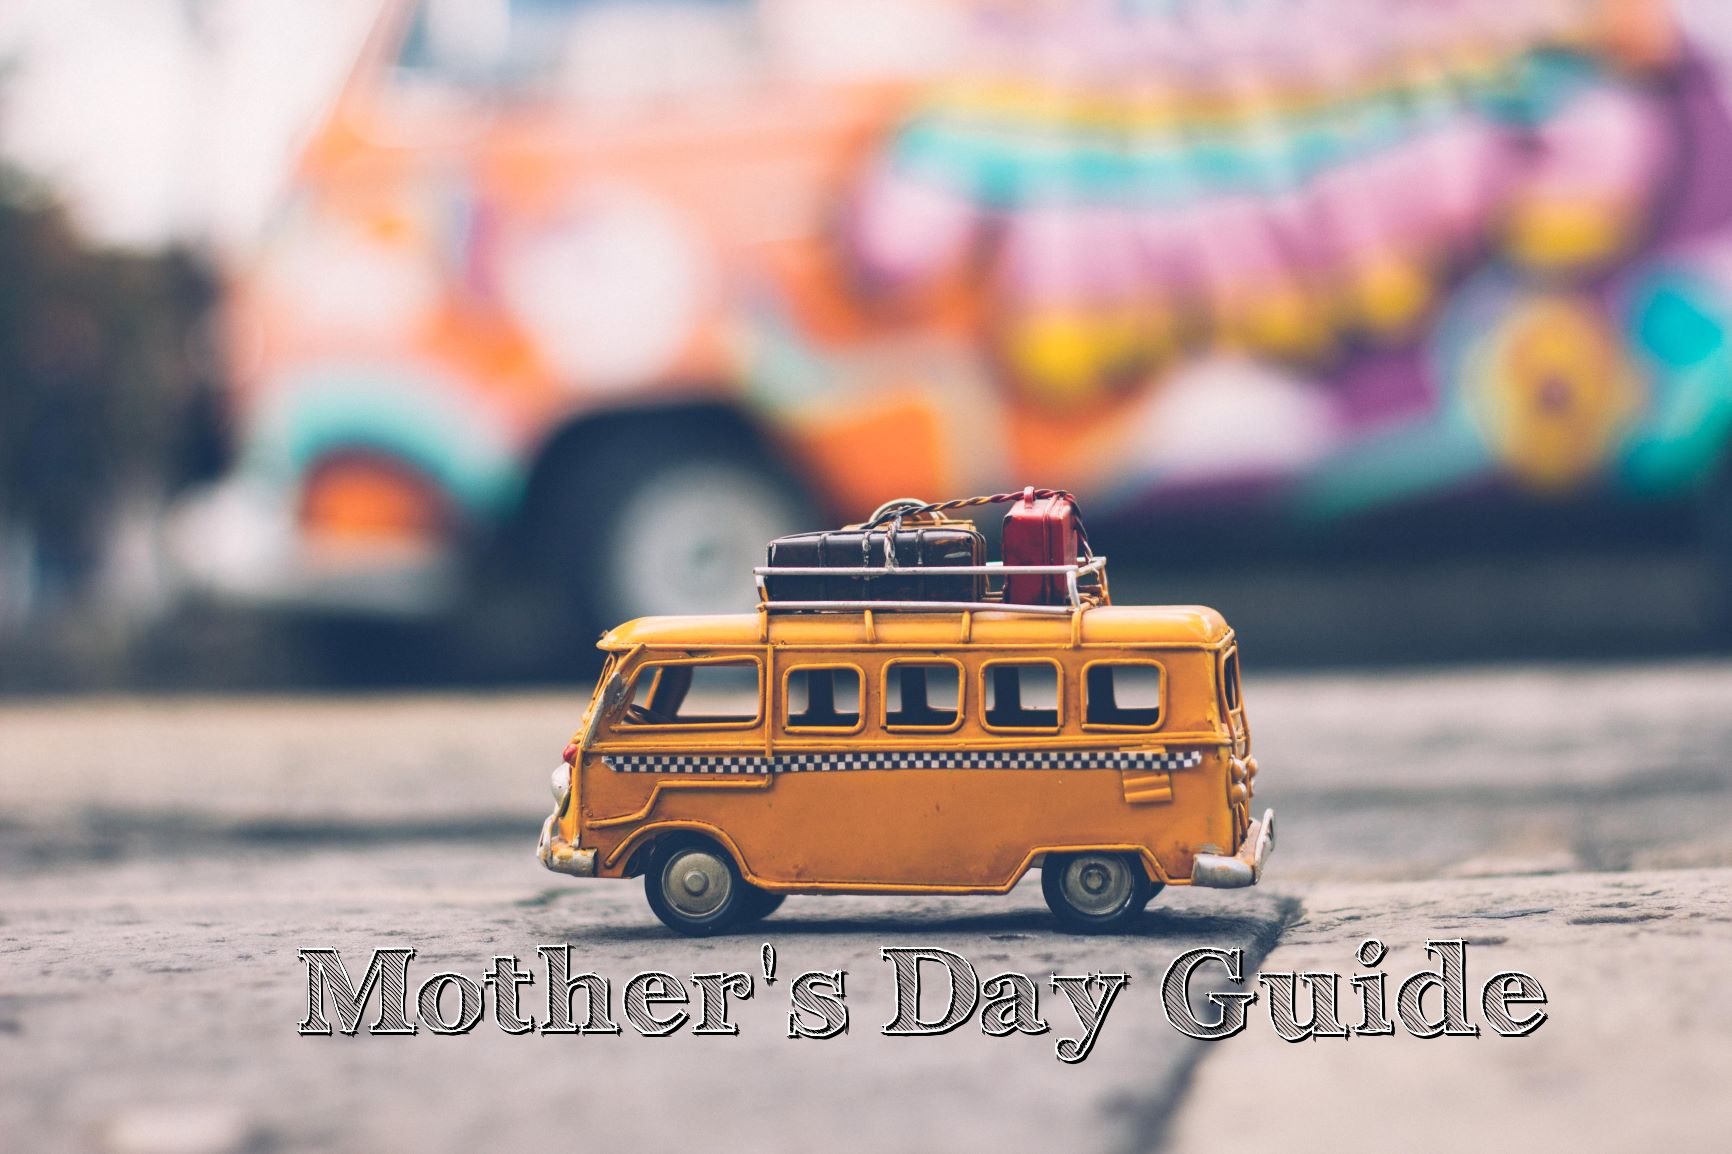 Mother's day guide